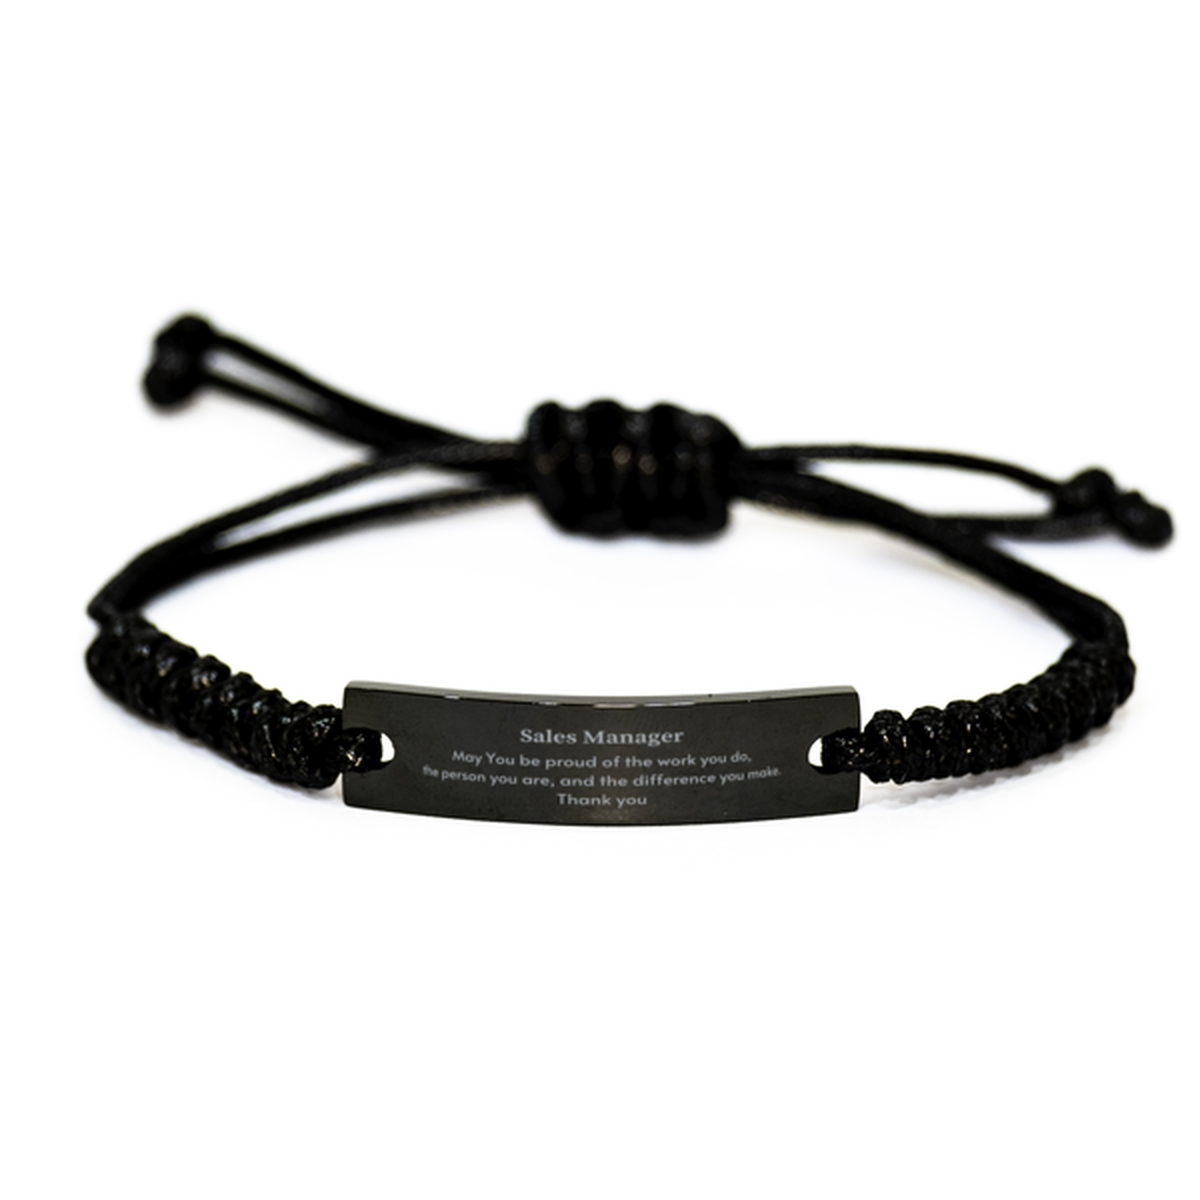 Heartwarming Black Rope Bracelet Retirement Coworkers Gifts for Sales Manager, Sales Manager May You be proud of the work you do, the person you are Gifts for Boss Men Women Friends